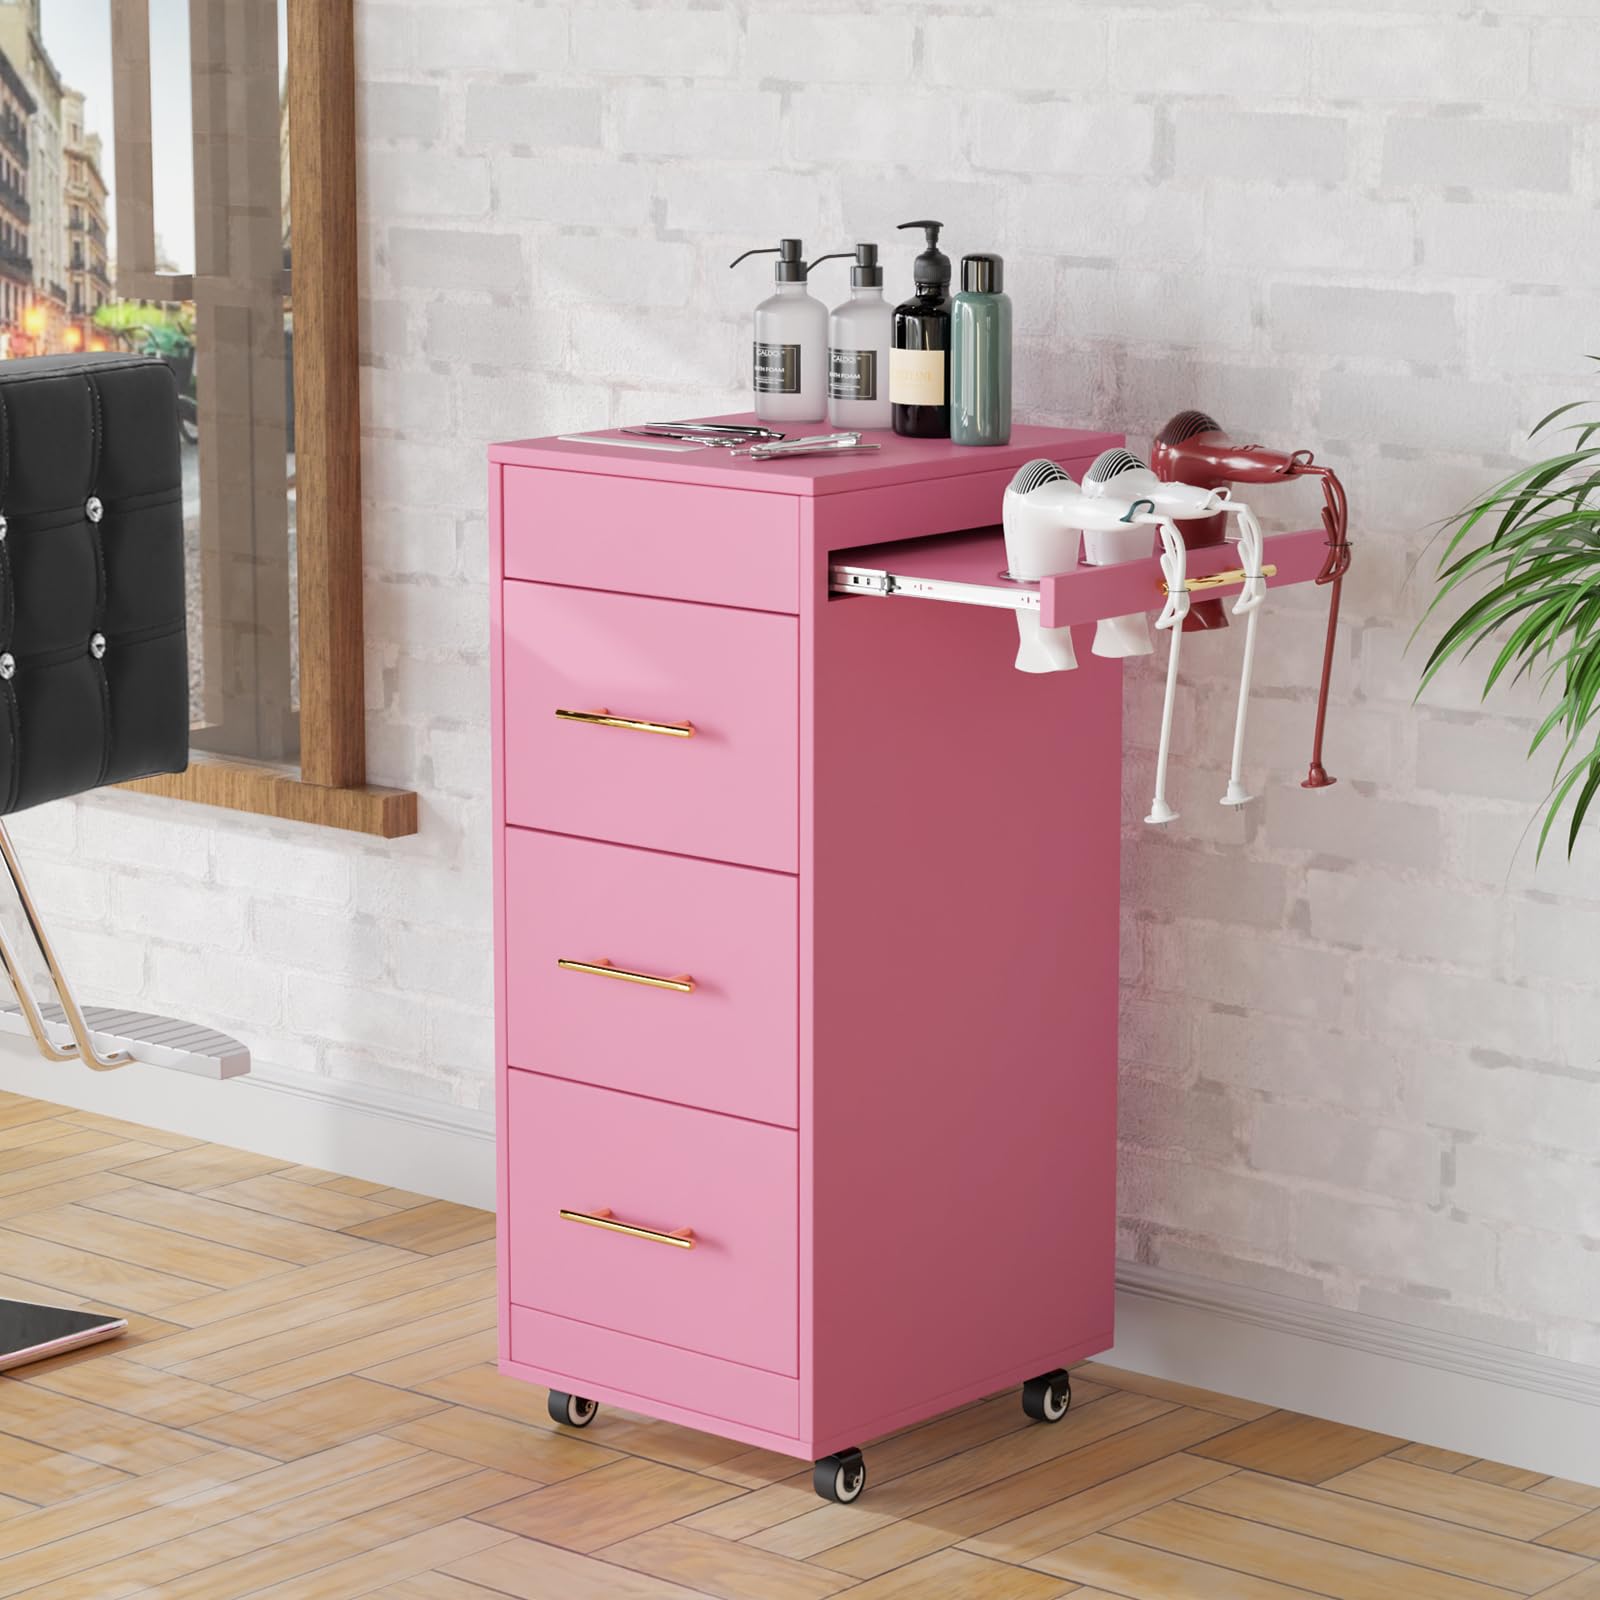 OmySalon Wooden Salon Trolley Cart Hairdresser Mobile Storage Cabinet with Wheels Black/White/Rustic Brown/Grey/Pink